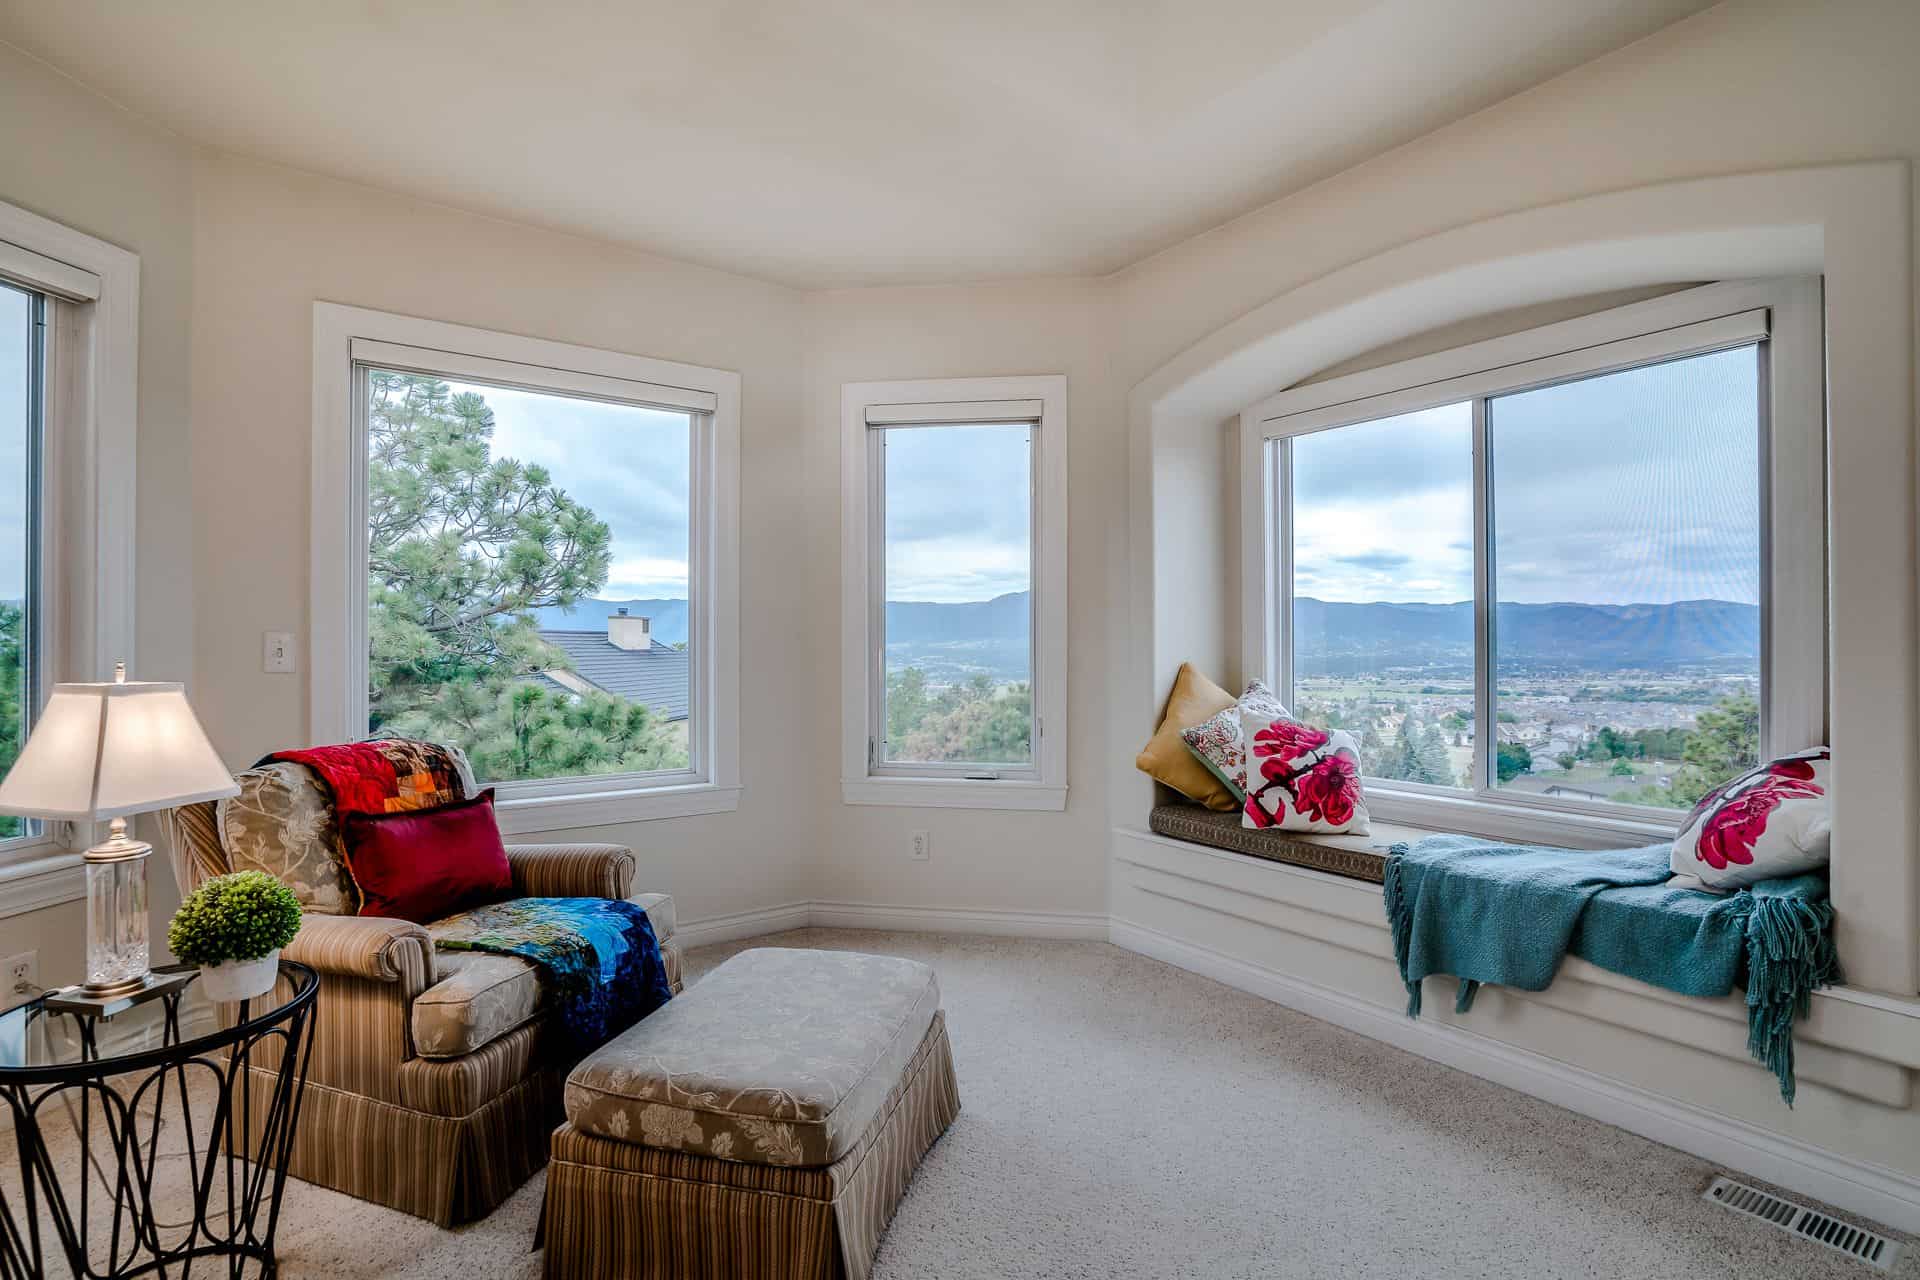 Master Bedroom Window Seat and Views